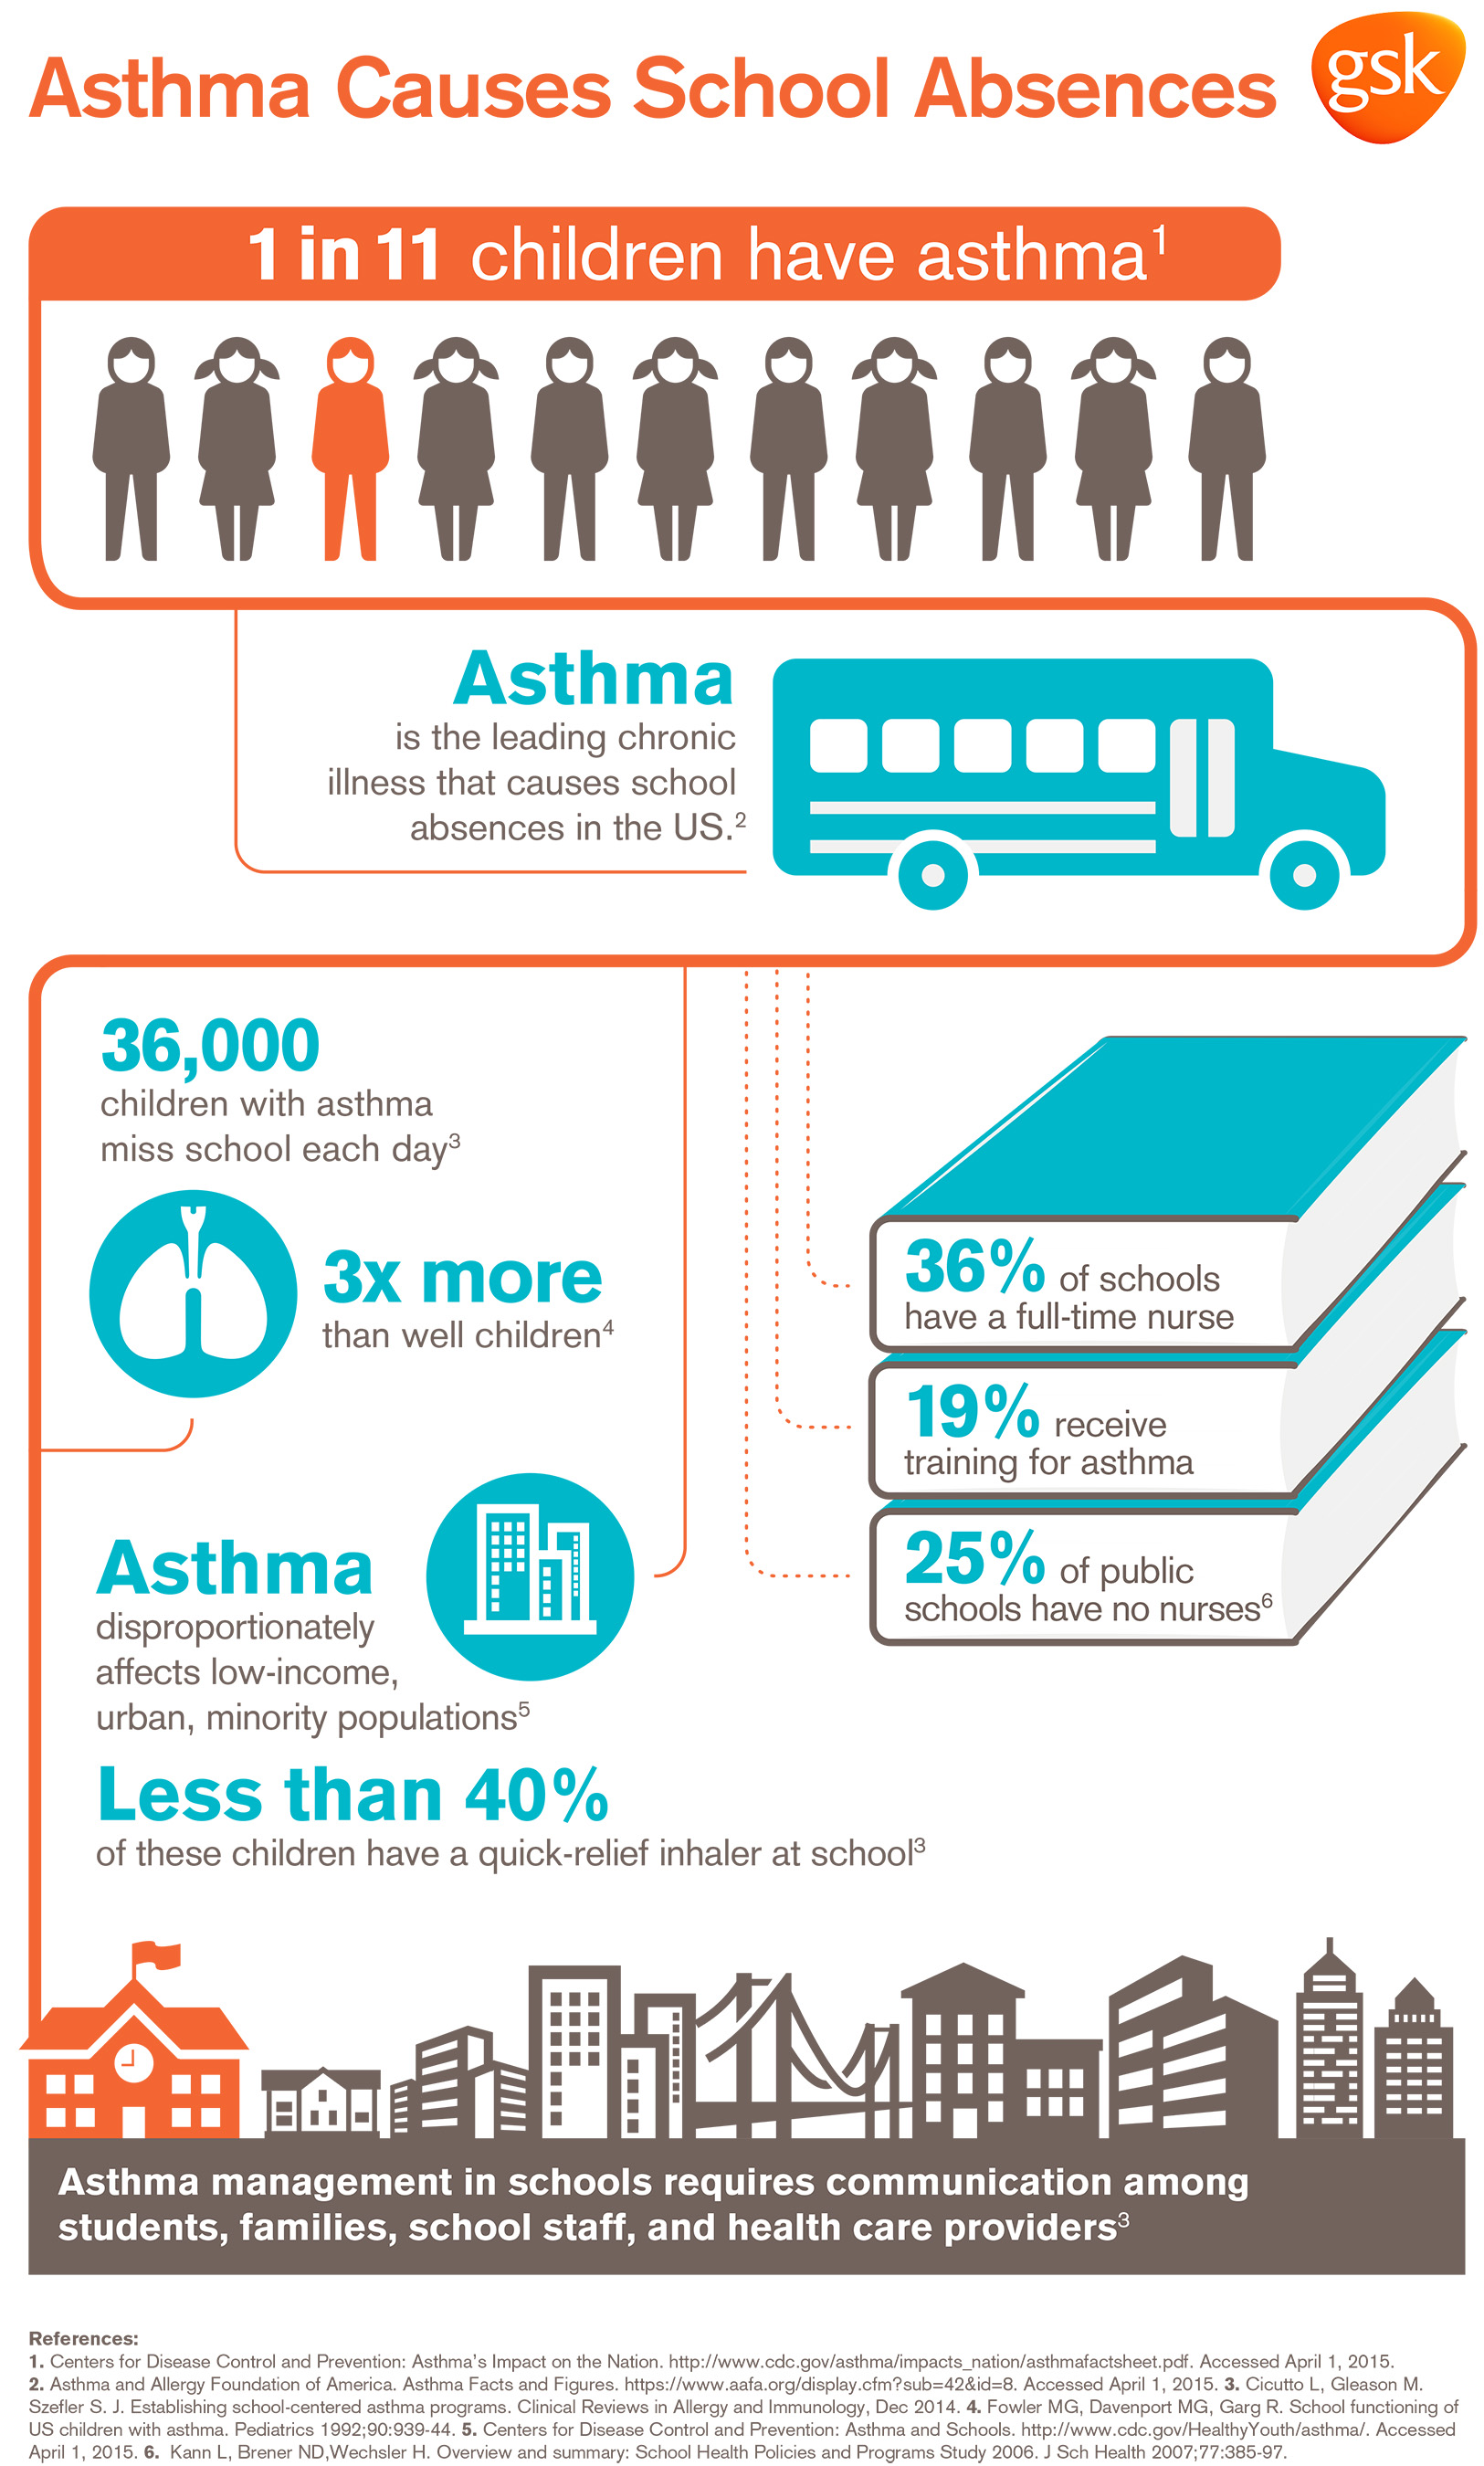 Asthma Causes School Absences